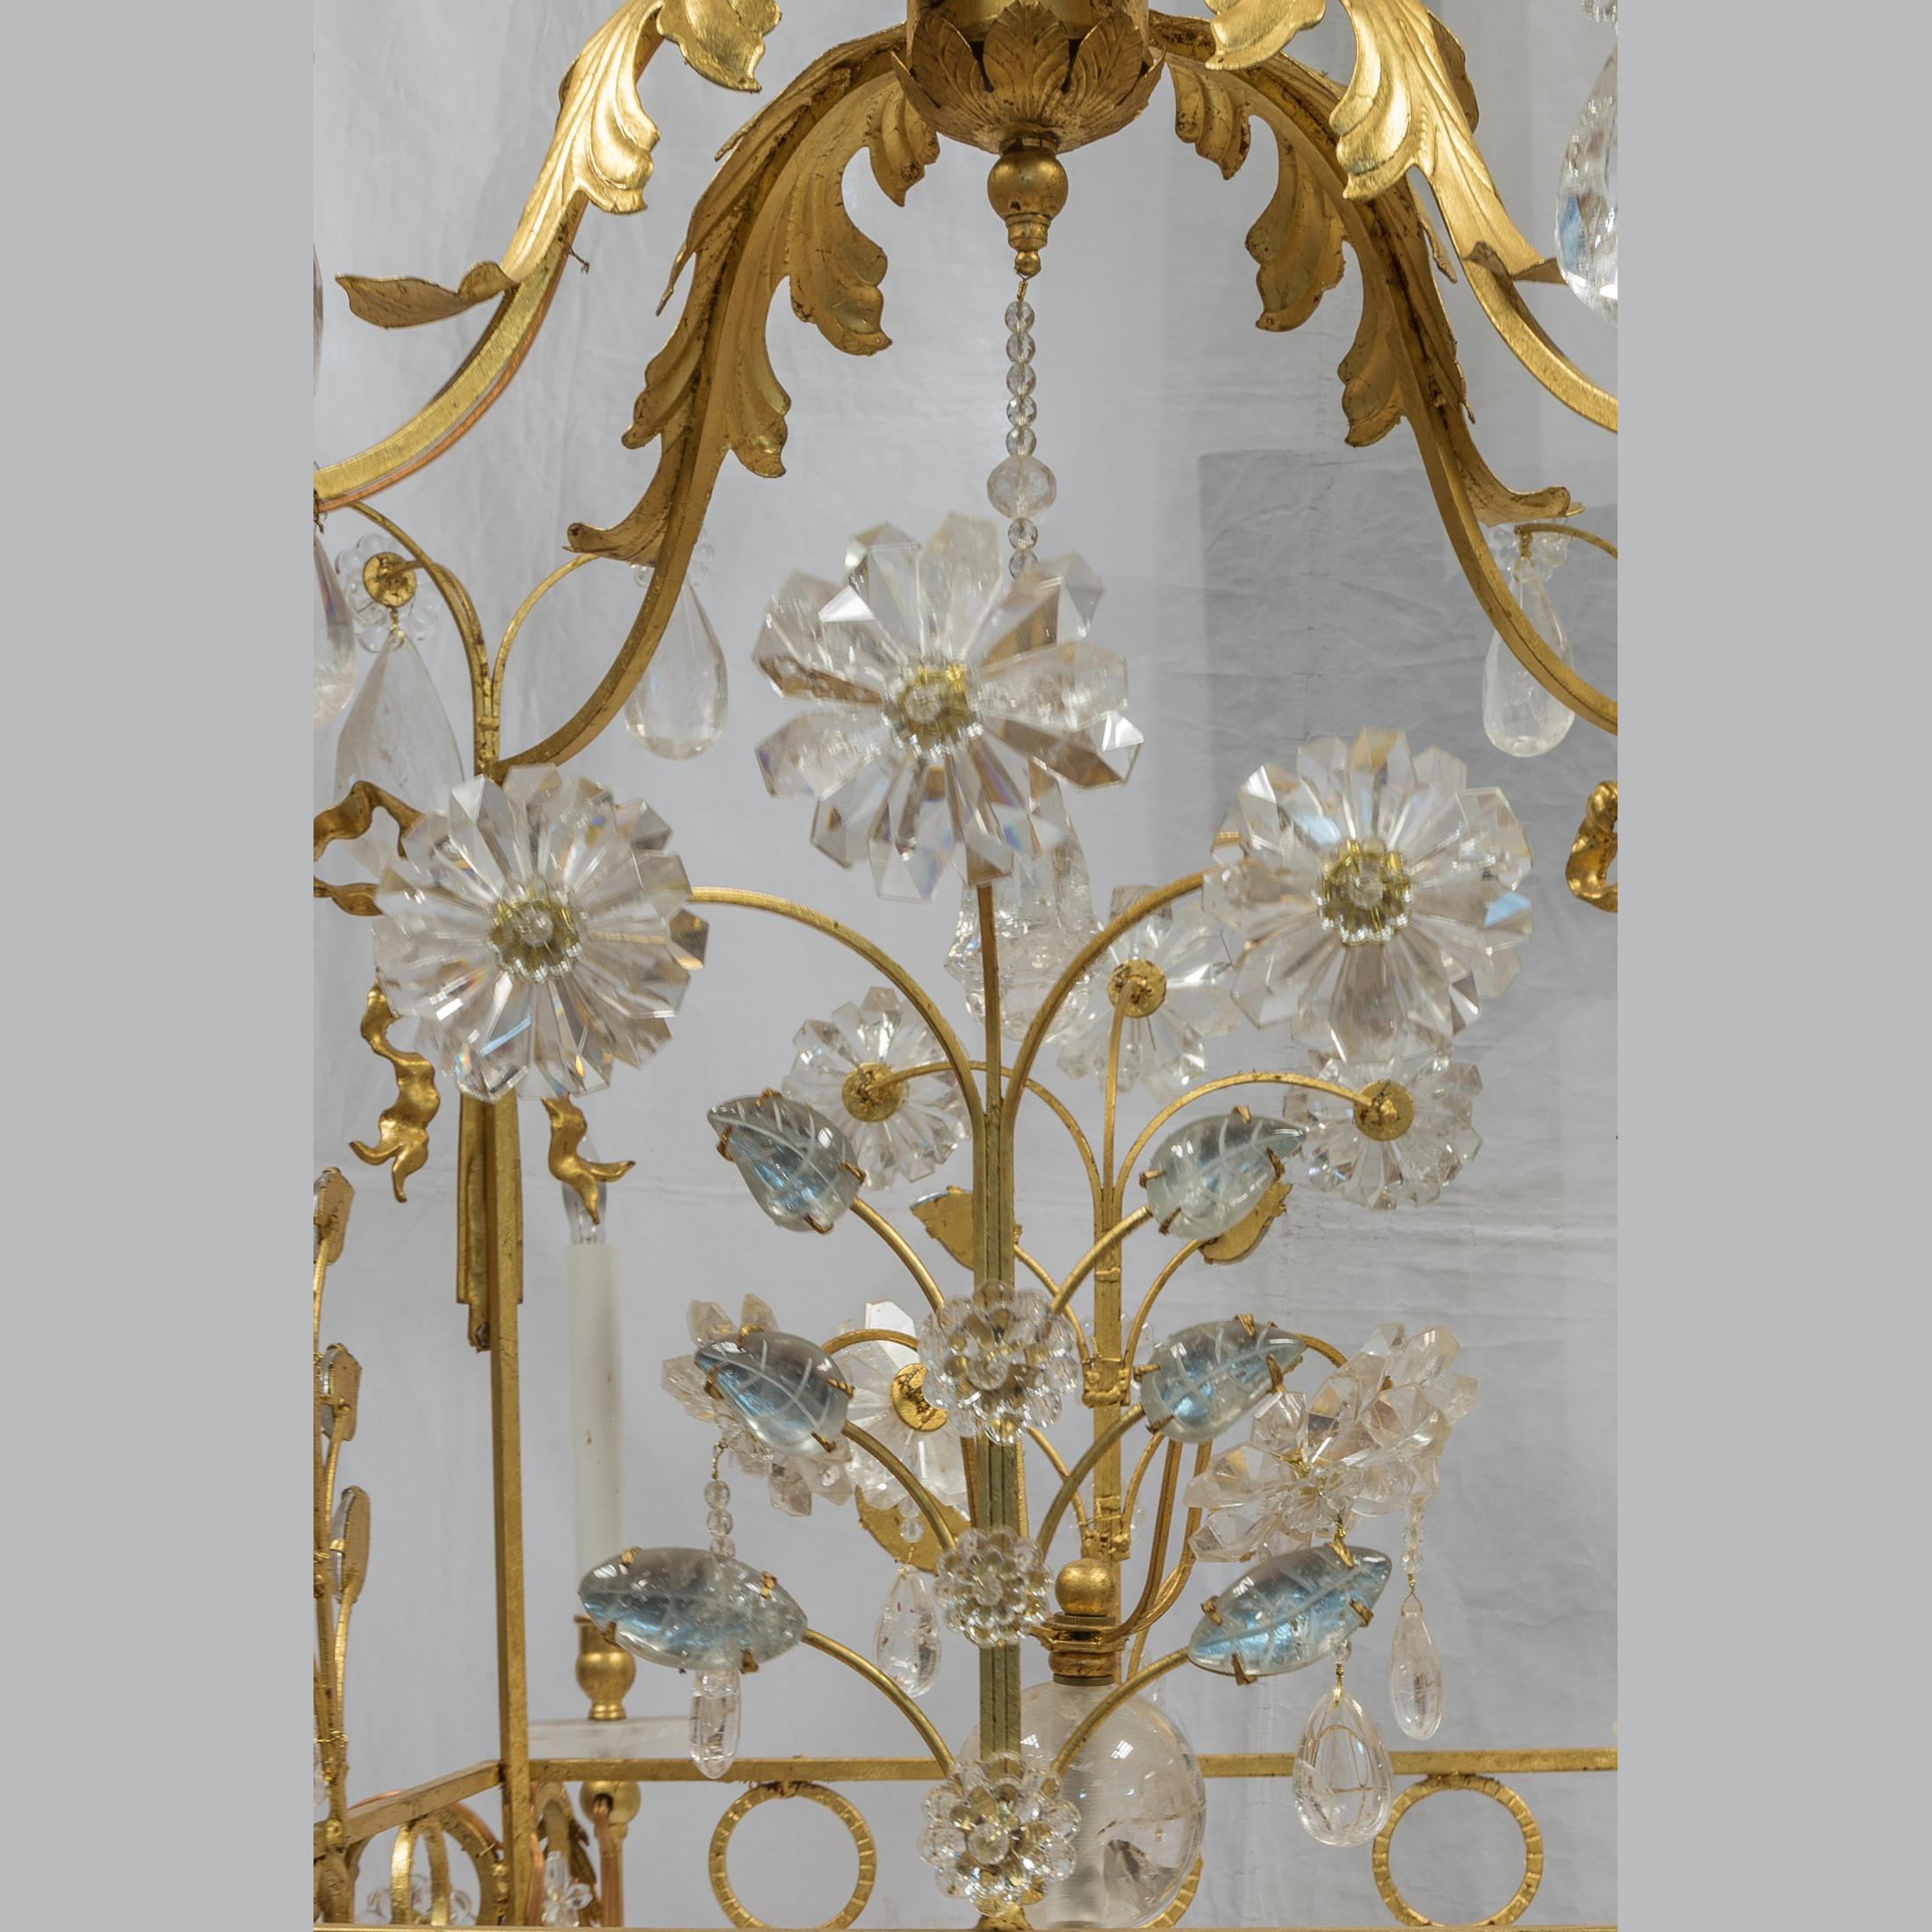 About

Early 20th century charming gilt-metal and rock crystal cage-formed eight-light chandelier mounted with multifaceted hand carved rock crystal center column and profusely mounted with rock crystal elements and drops on branches.

Origin: